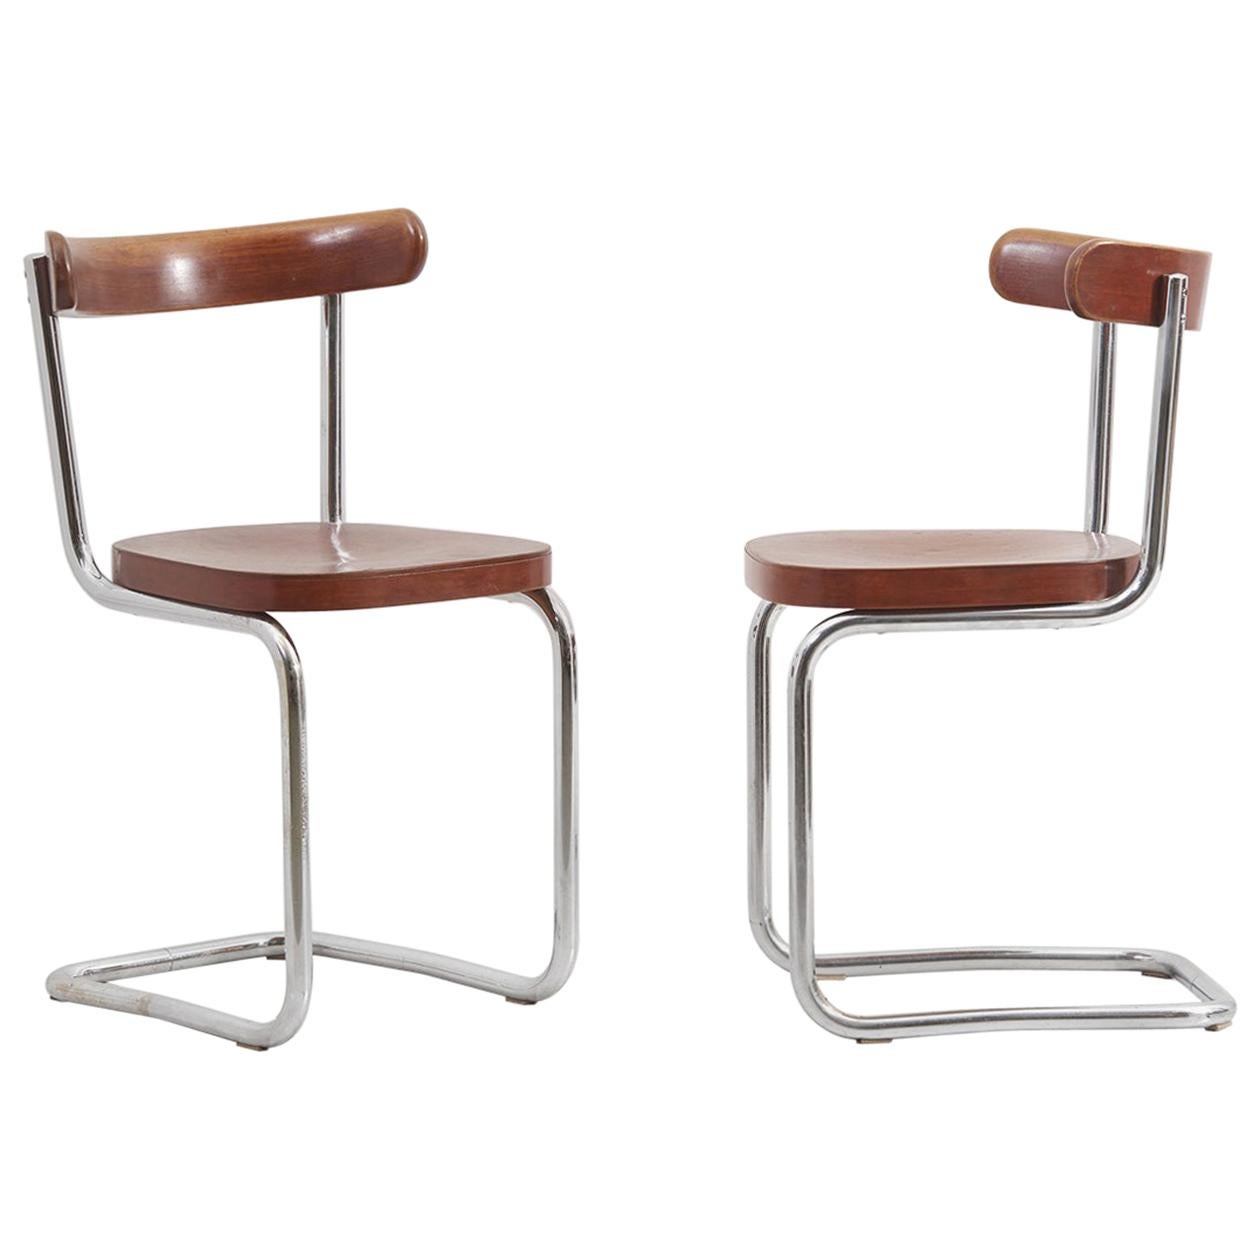 Pair of Chairs by Mart Stam for Mücke-Melder 'Under License from Thonet', 1930s